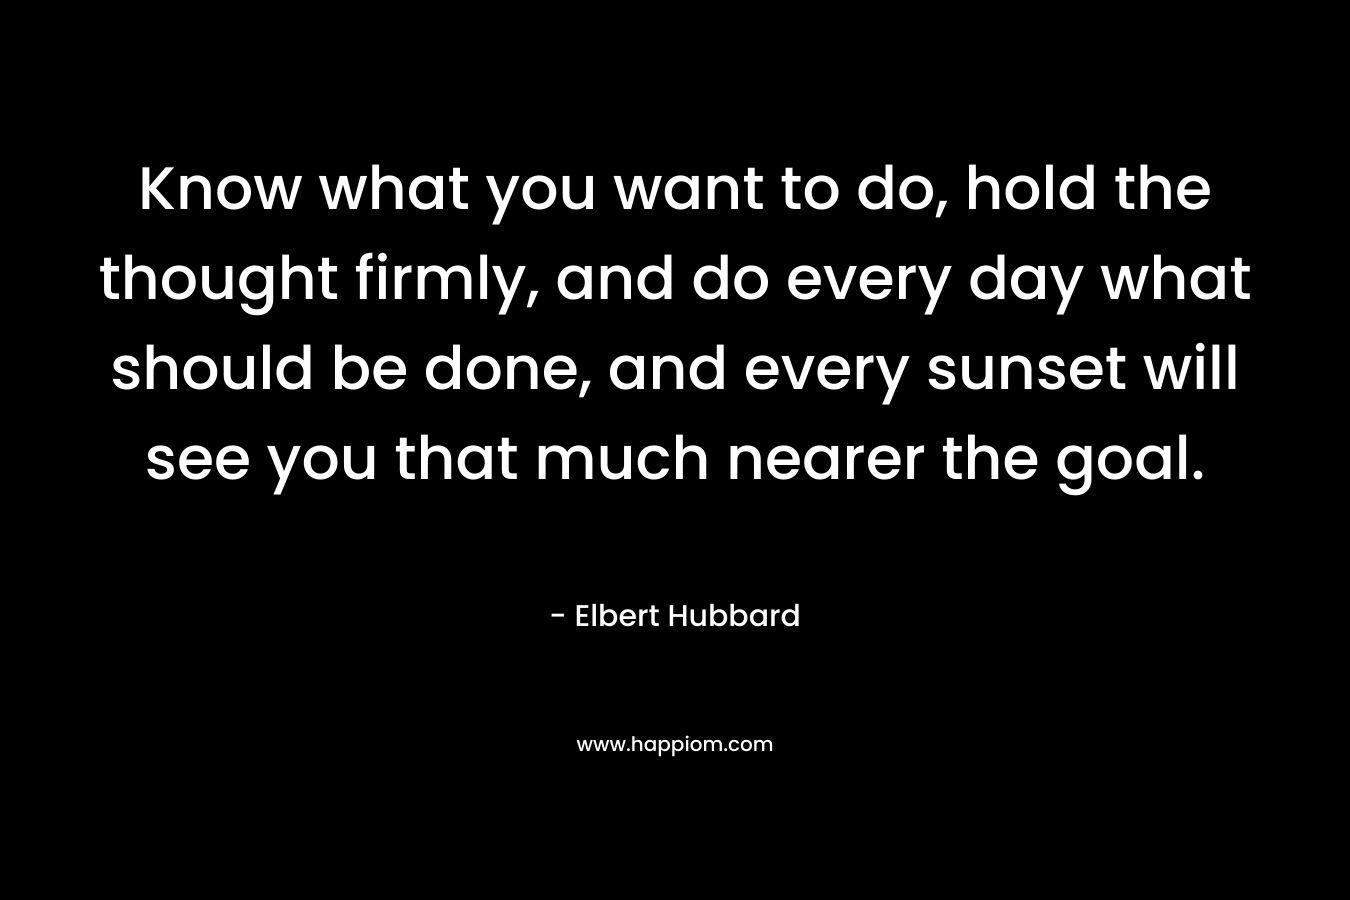 Know what you want to do, hold the thought firmly, and do every day what should be done, and every sunset will see you that much nearer the goal.